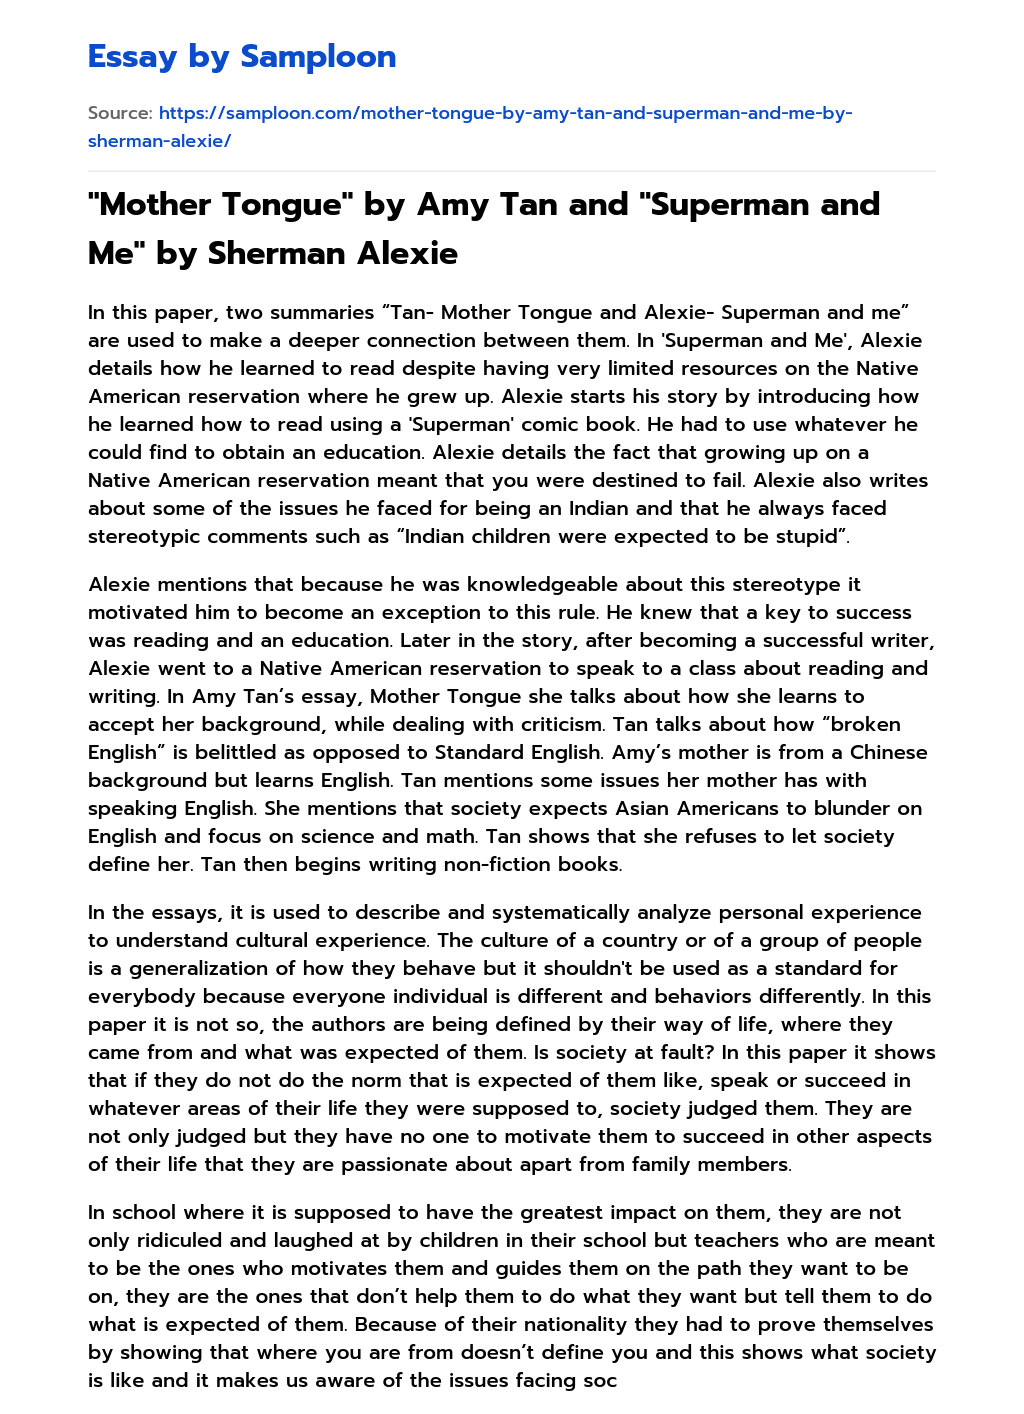 “Mother Tongue” by Amy Tan and “Superman and Me” by Sherman Alexie Rhetorical Analysis essay